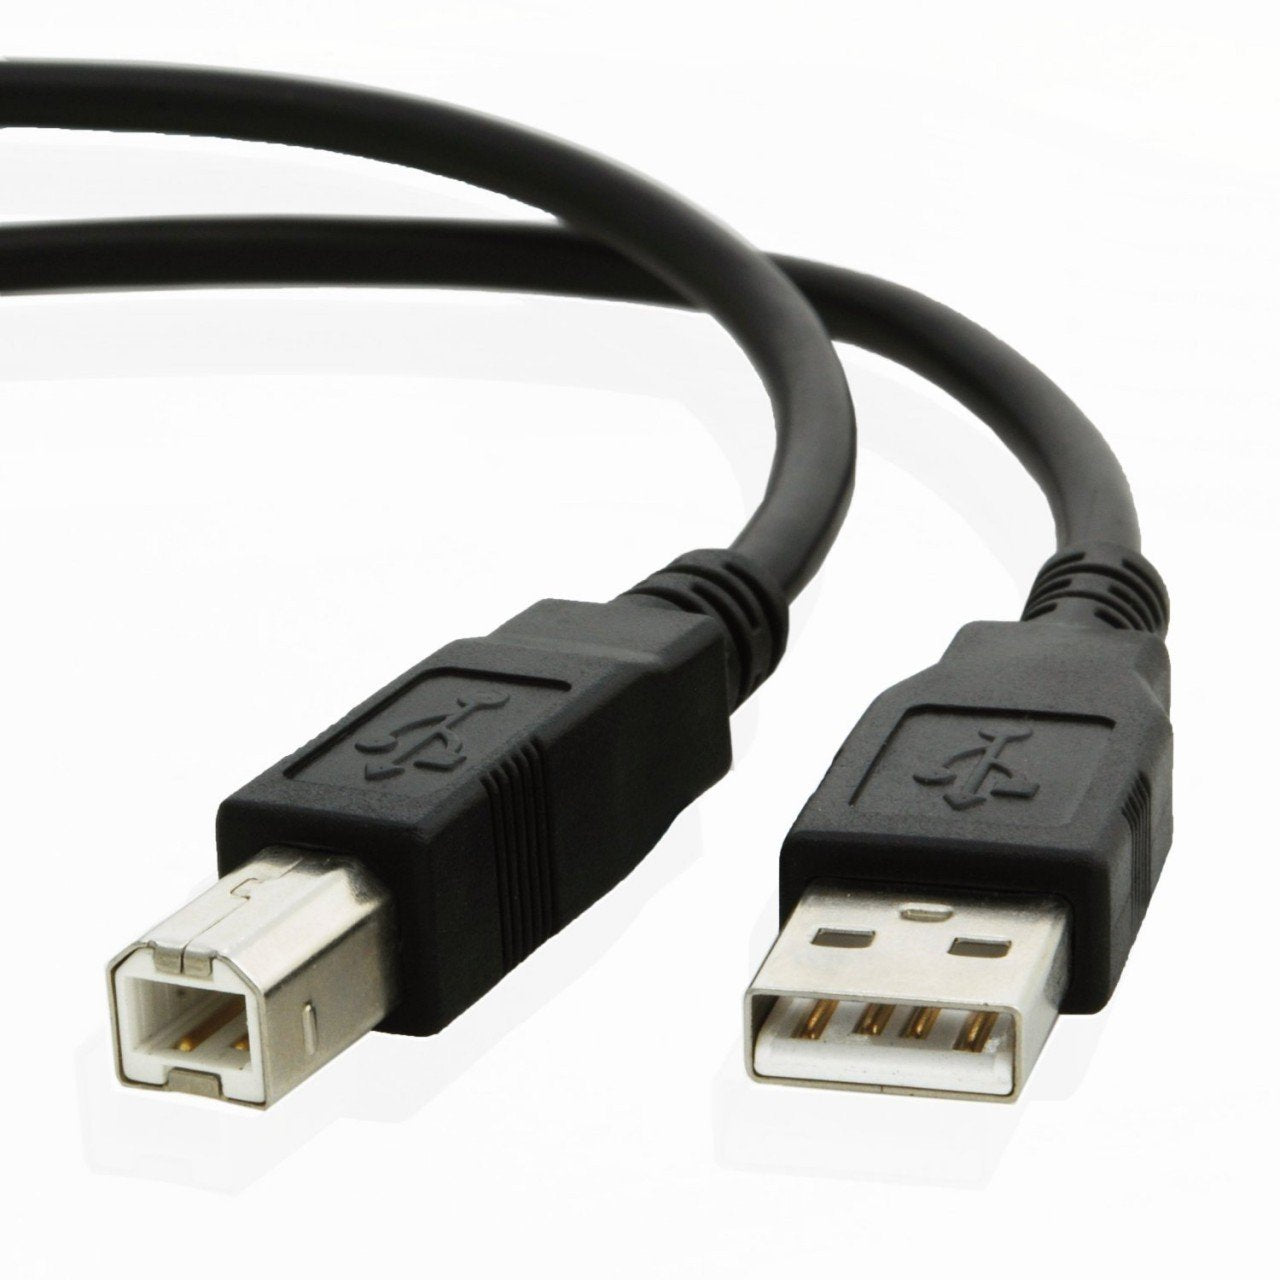 USB cable for Canon ISENSYS MF633Cdw